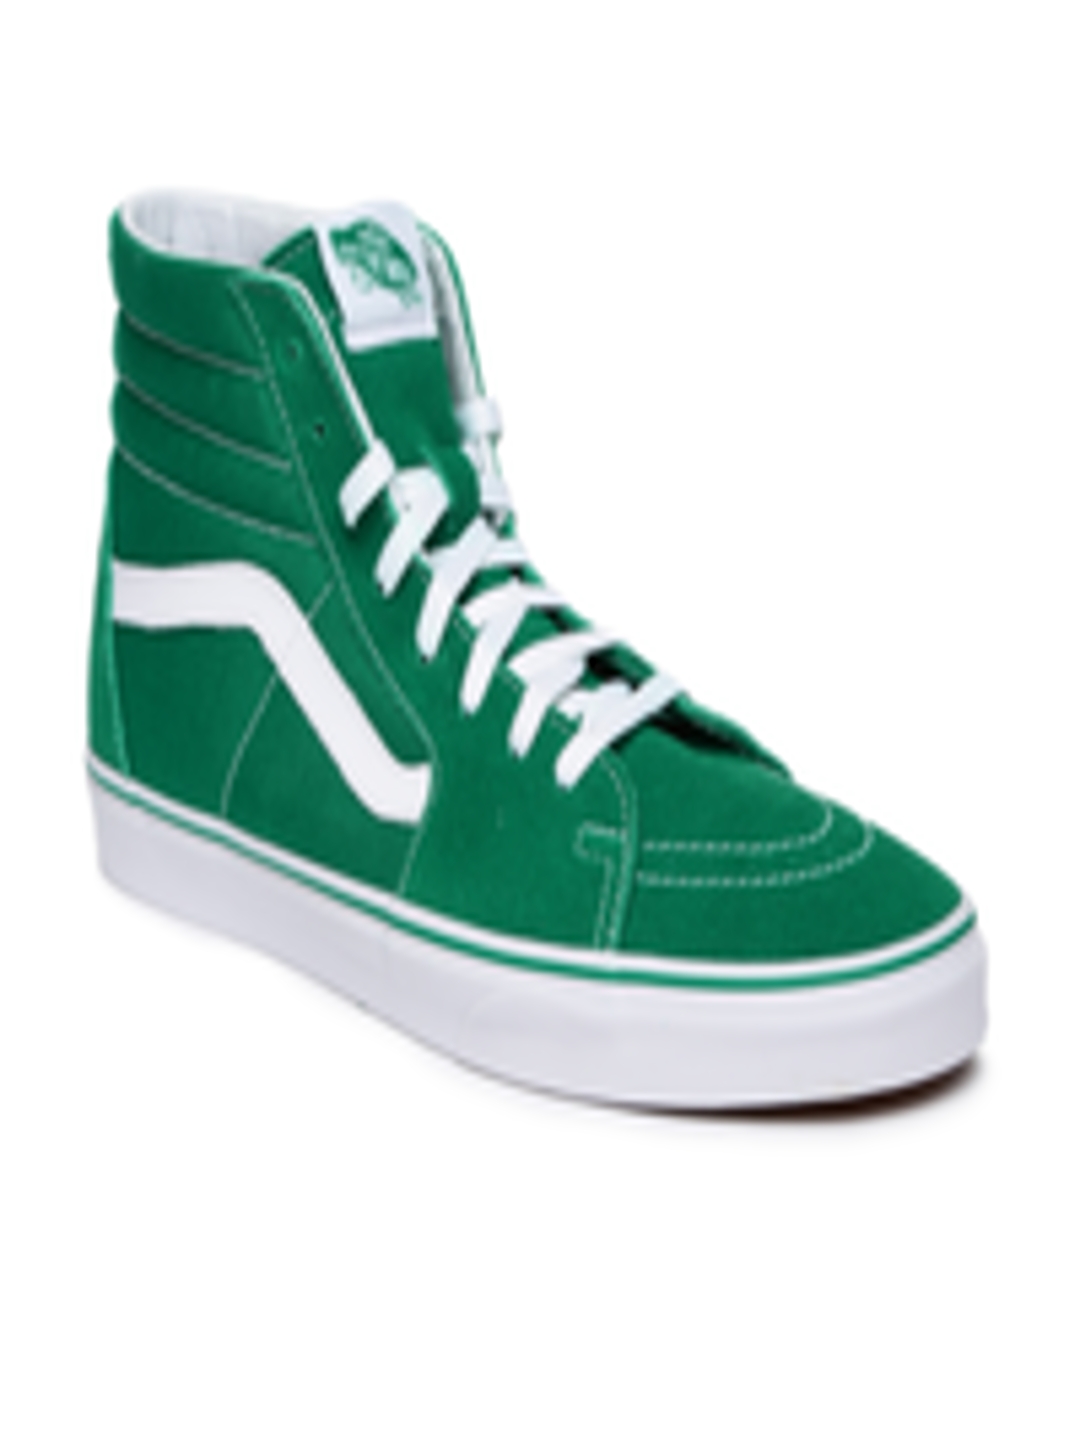 Buy Vans Unisex Green Solid High Top Skate Shoes - Casual Shoes for